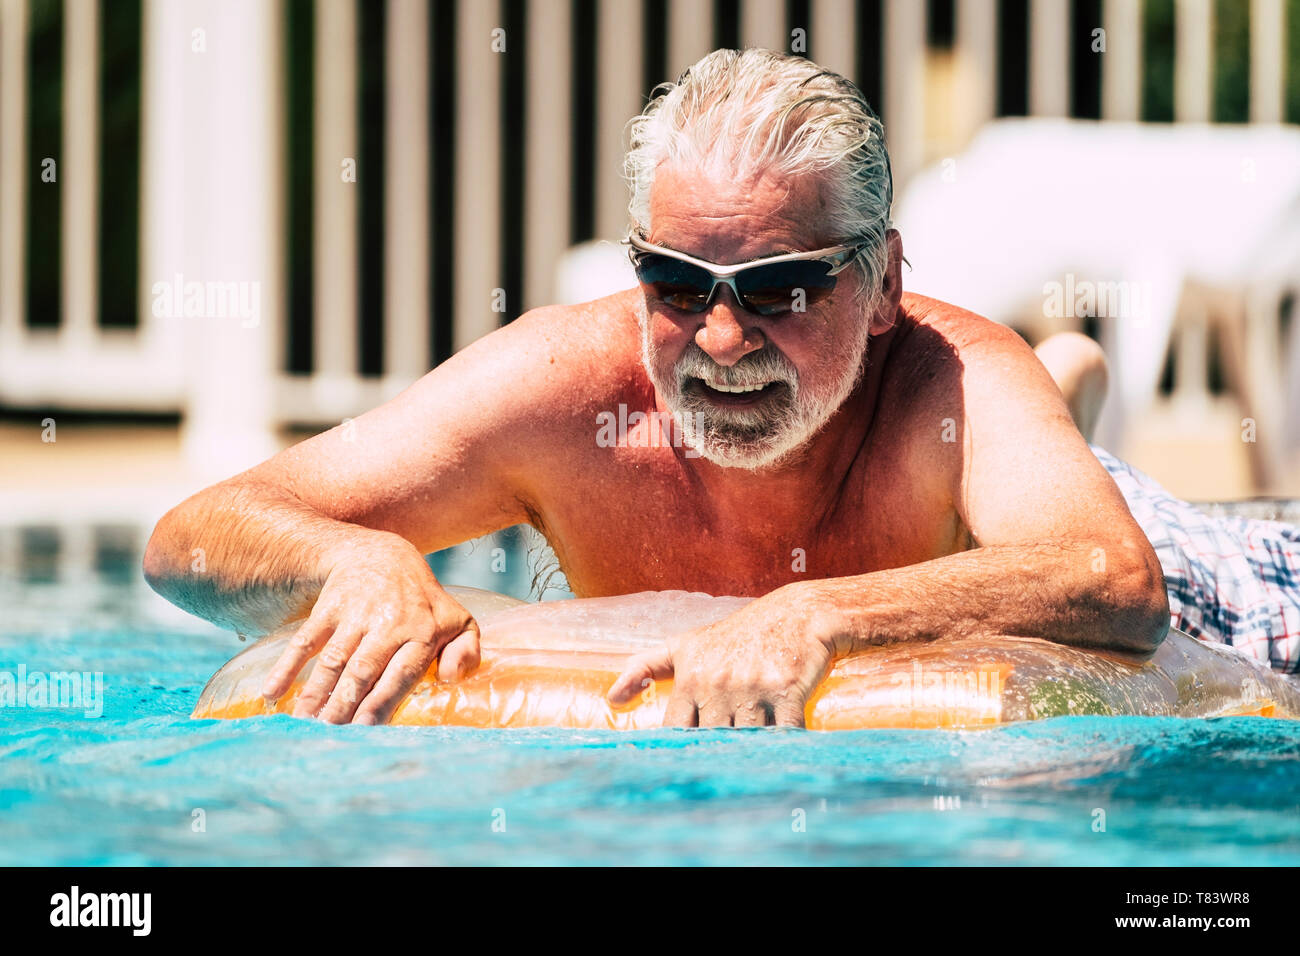 Trendsetting old man swim trunks For Leisure And Fashion 